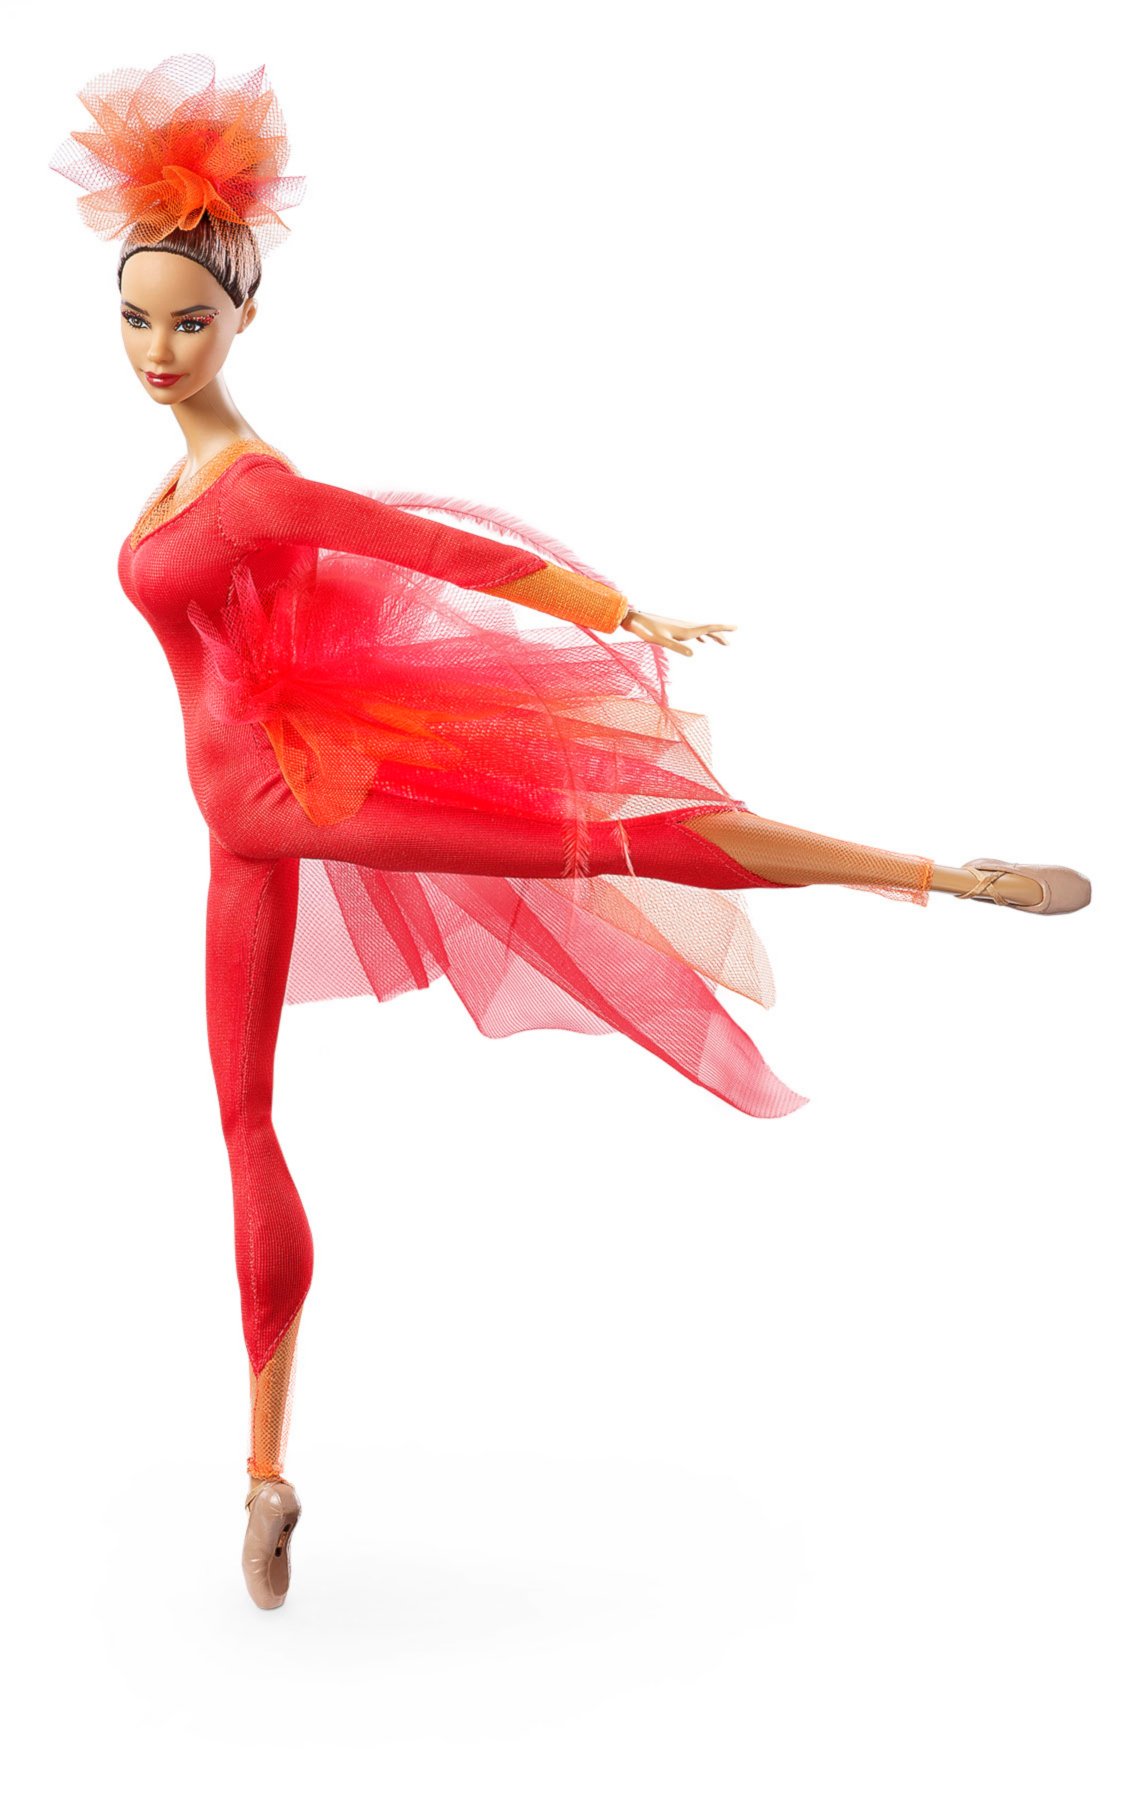 PHOTO: The Misty Copeland Barbie is pictured in this undated publicity photo.